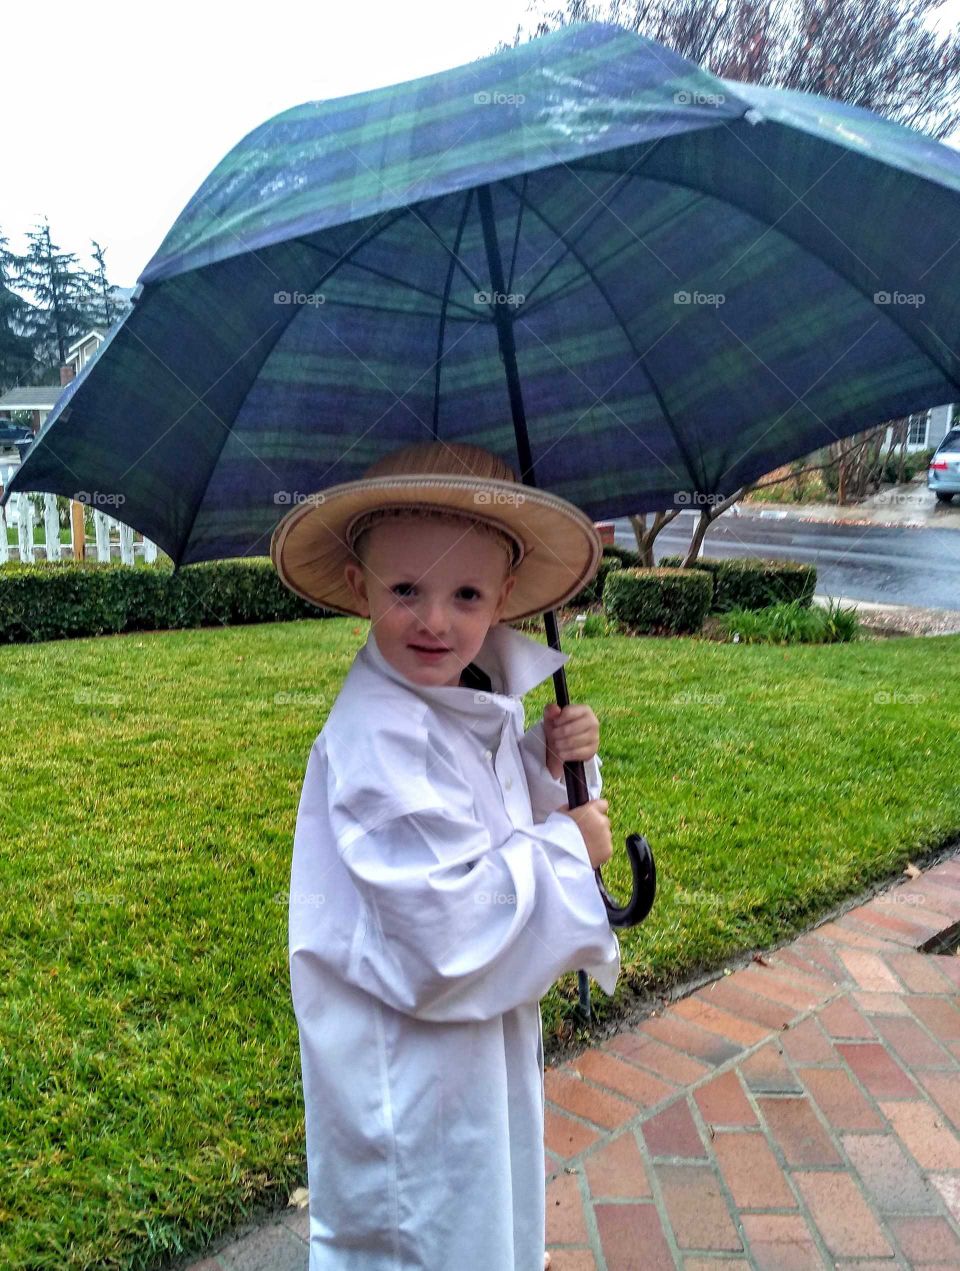 After the California fires 2018 and the end of November we finally get some rain my adorable nephew enjoying the rain as I caught him playing outside with the umbrella in the rain